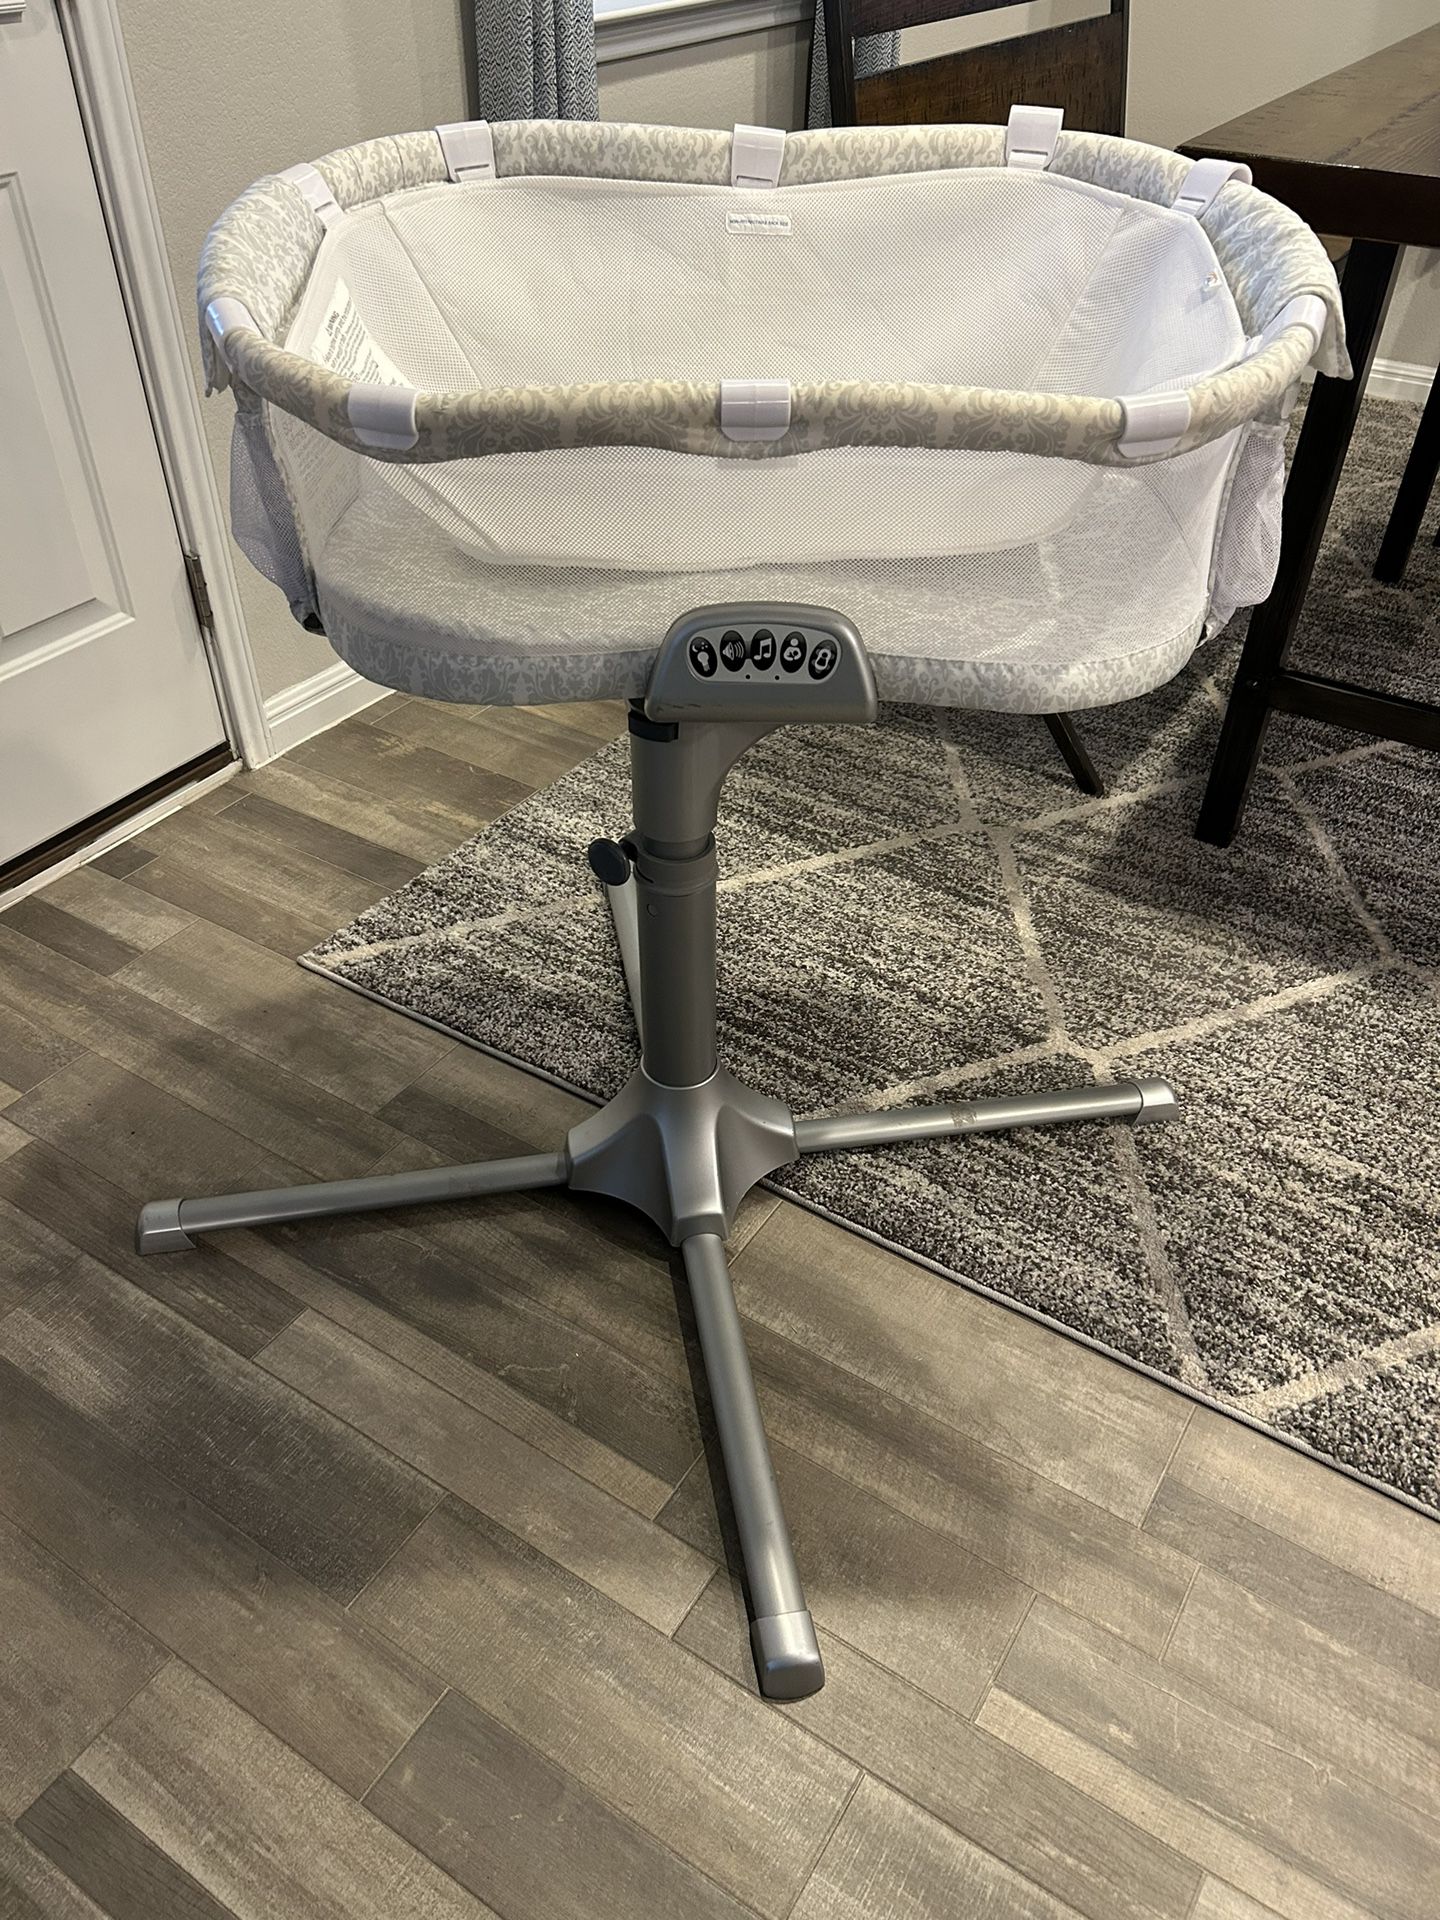 Halo Bassinet With Infant Insert 